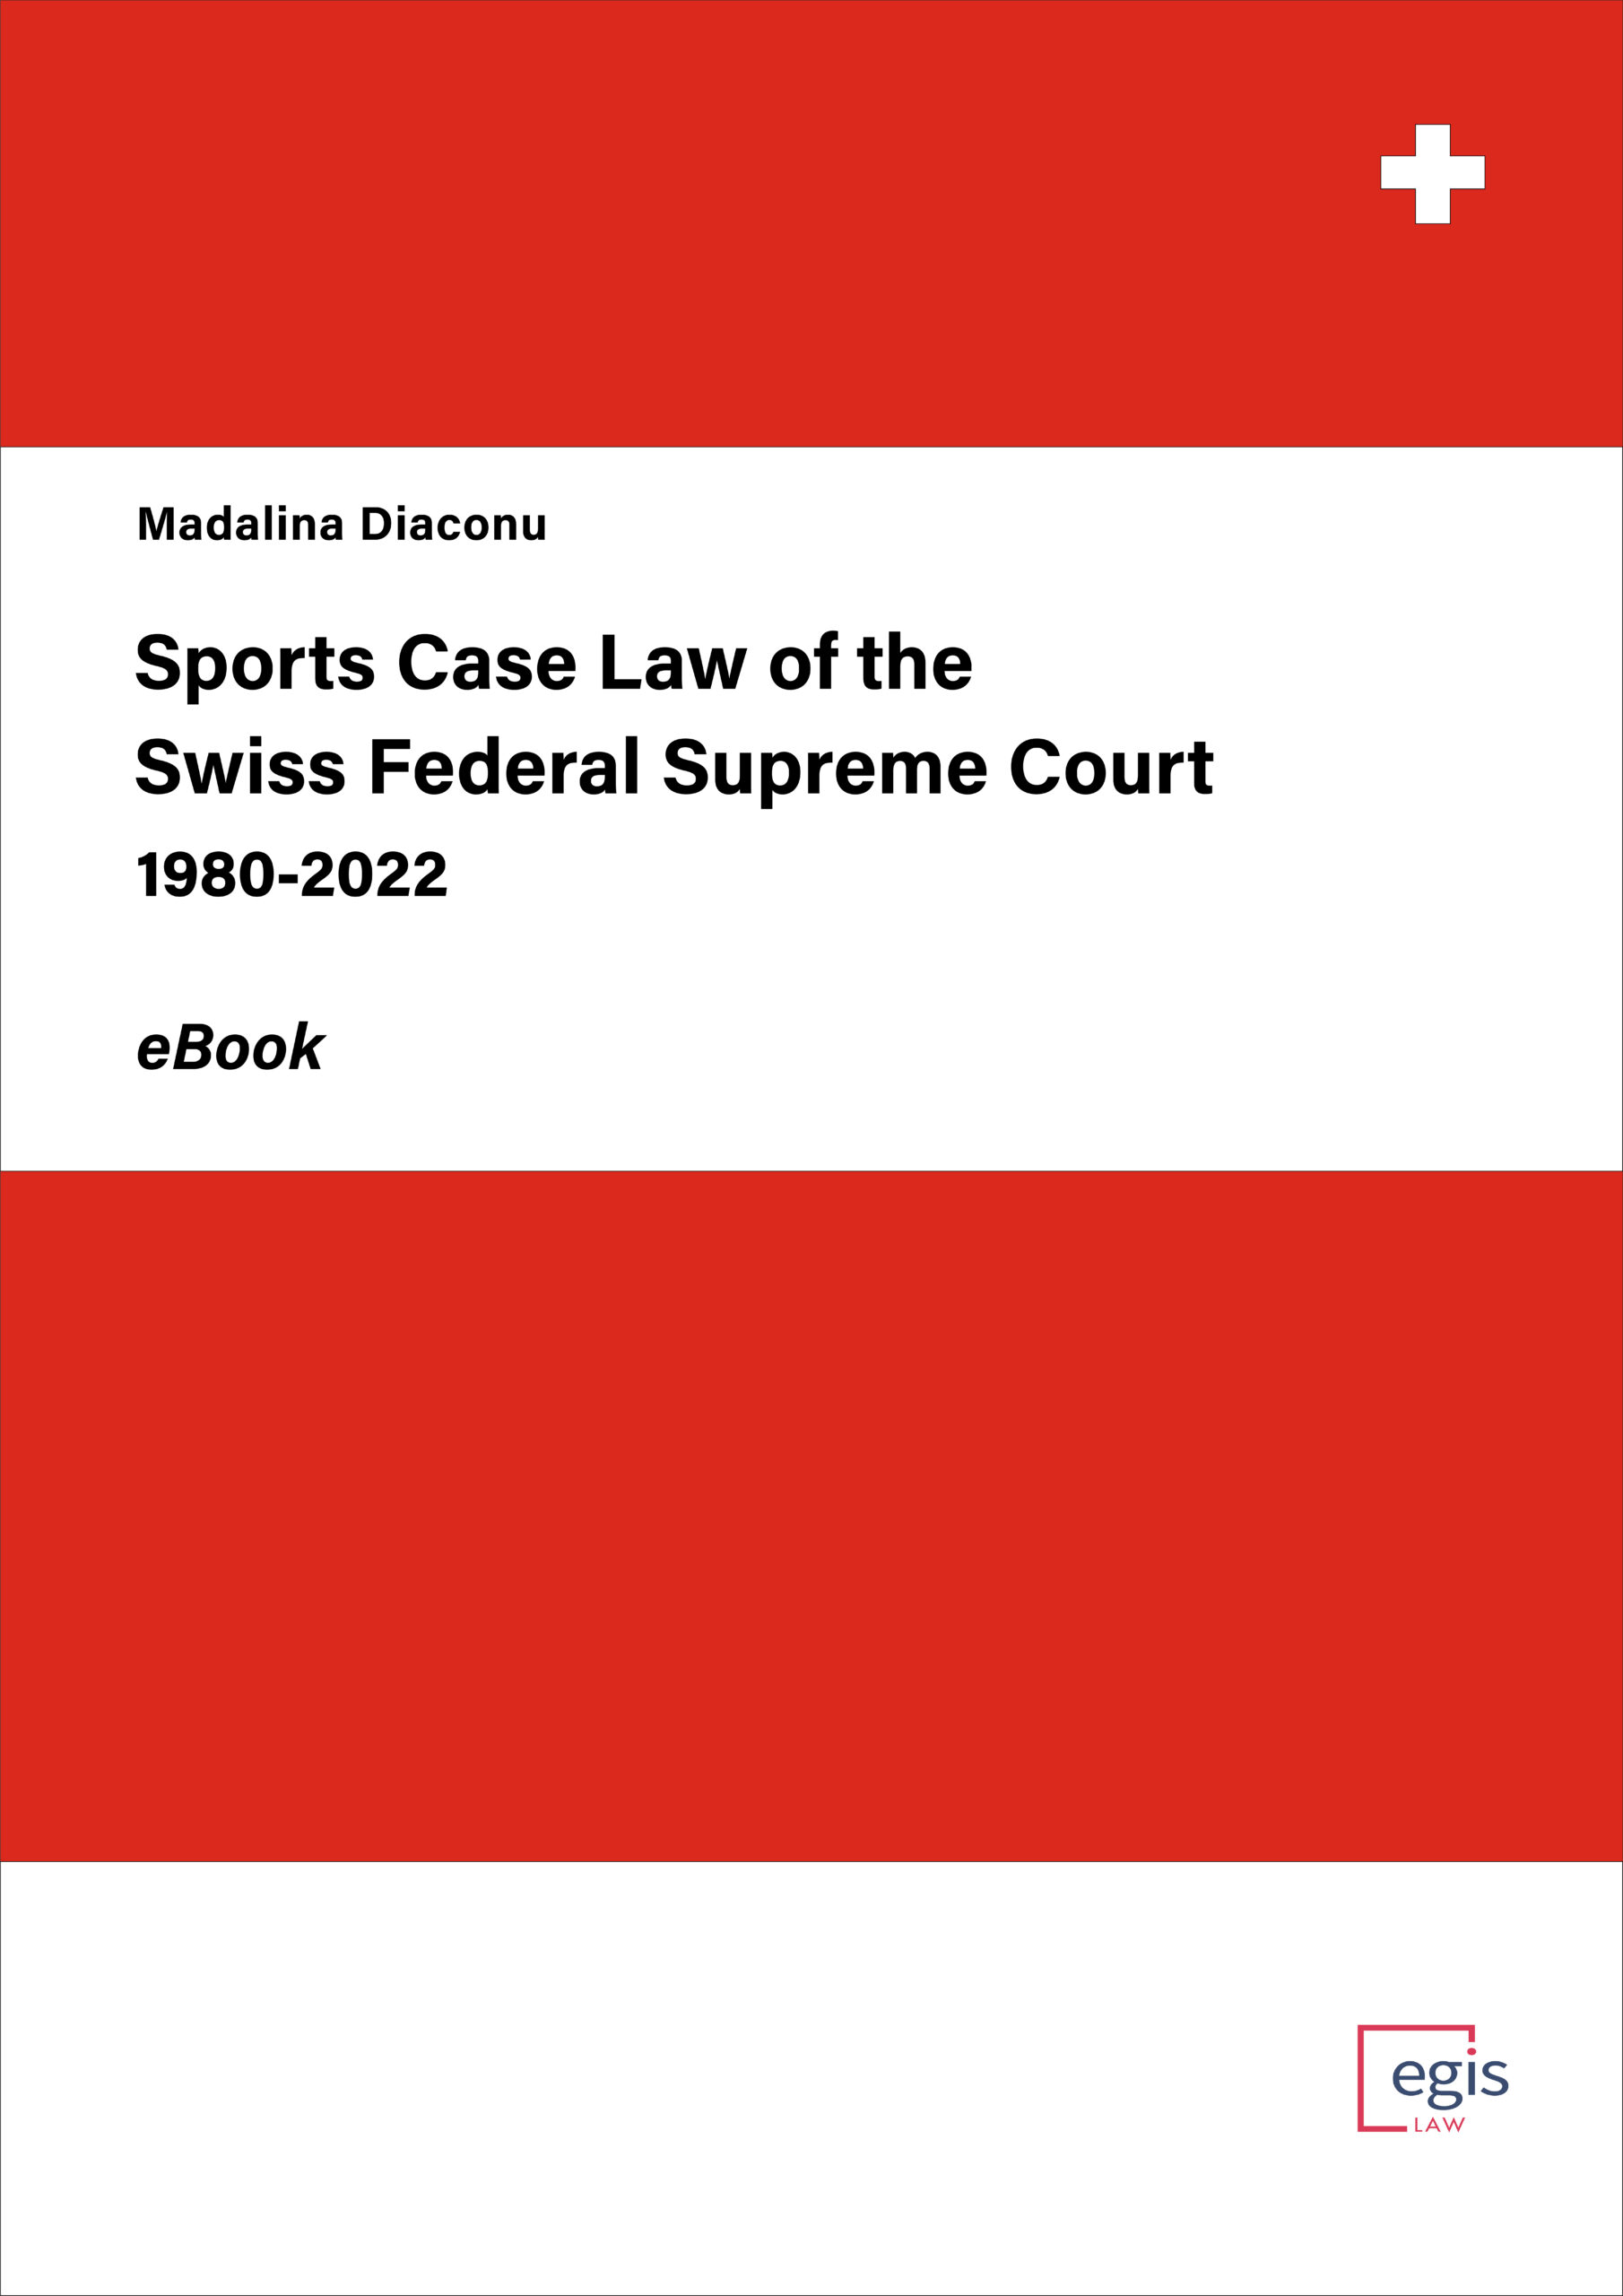 Sports Case Law eBook Cover1